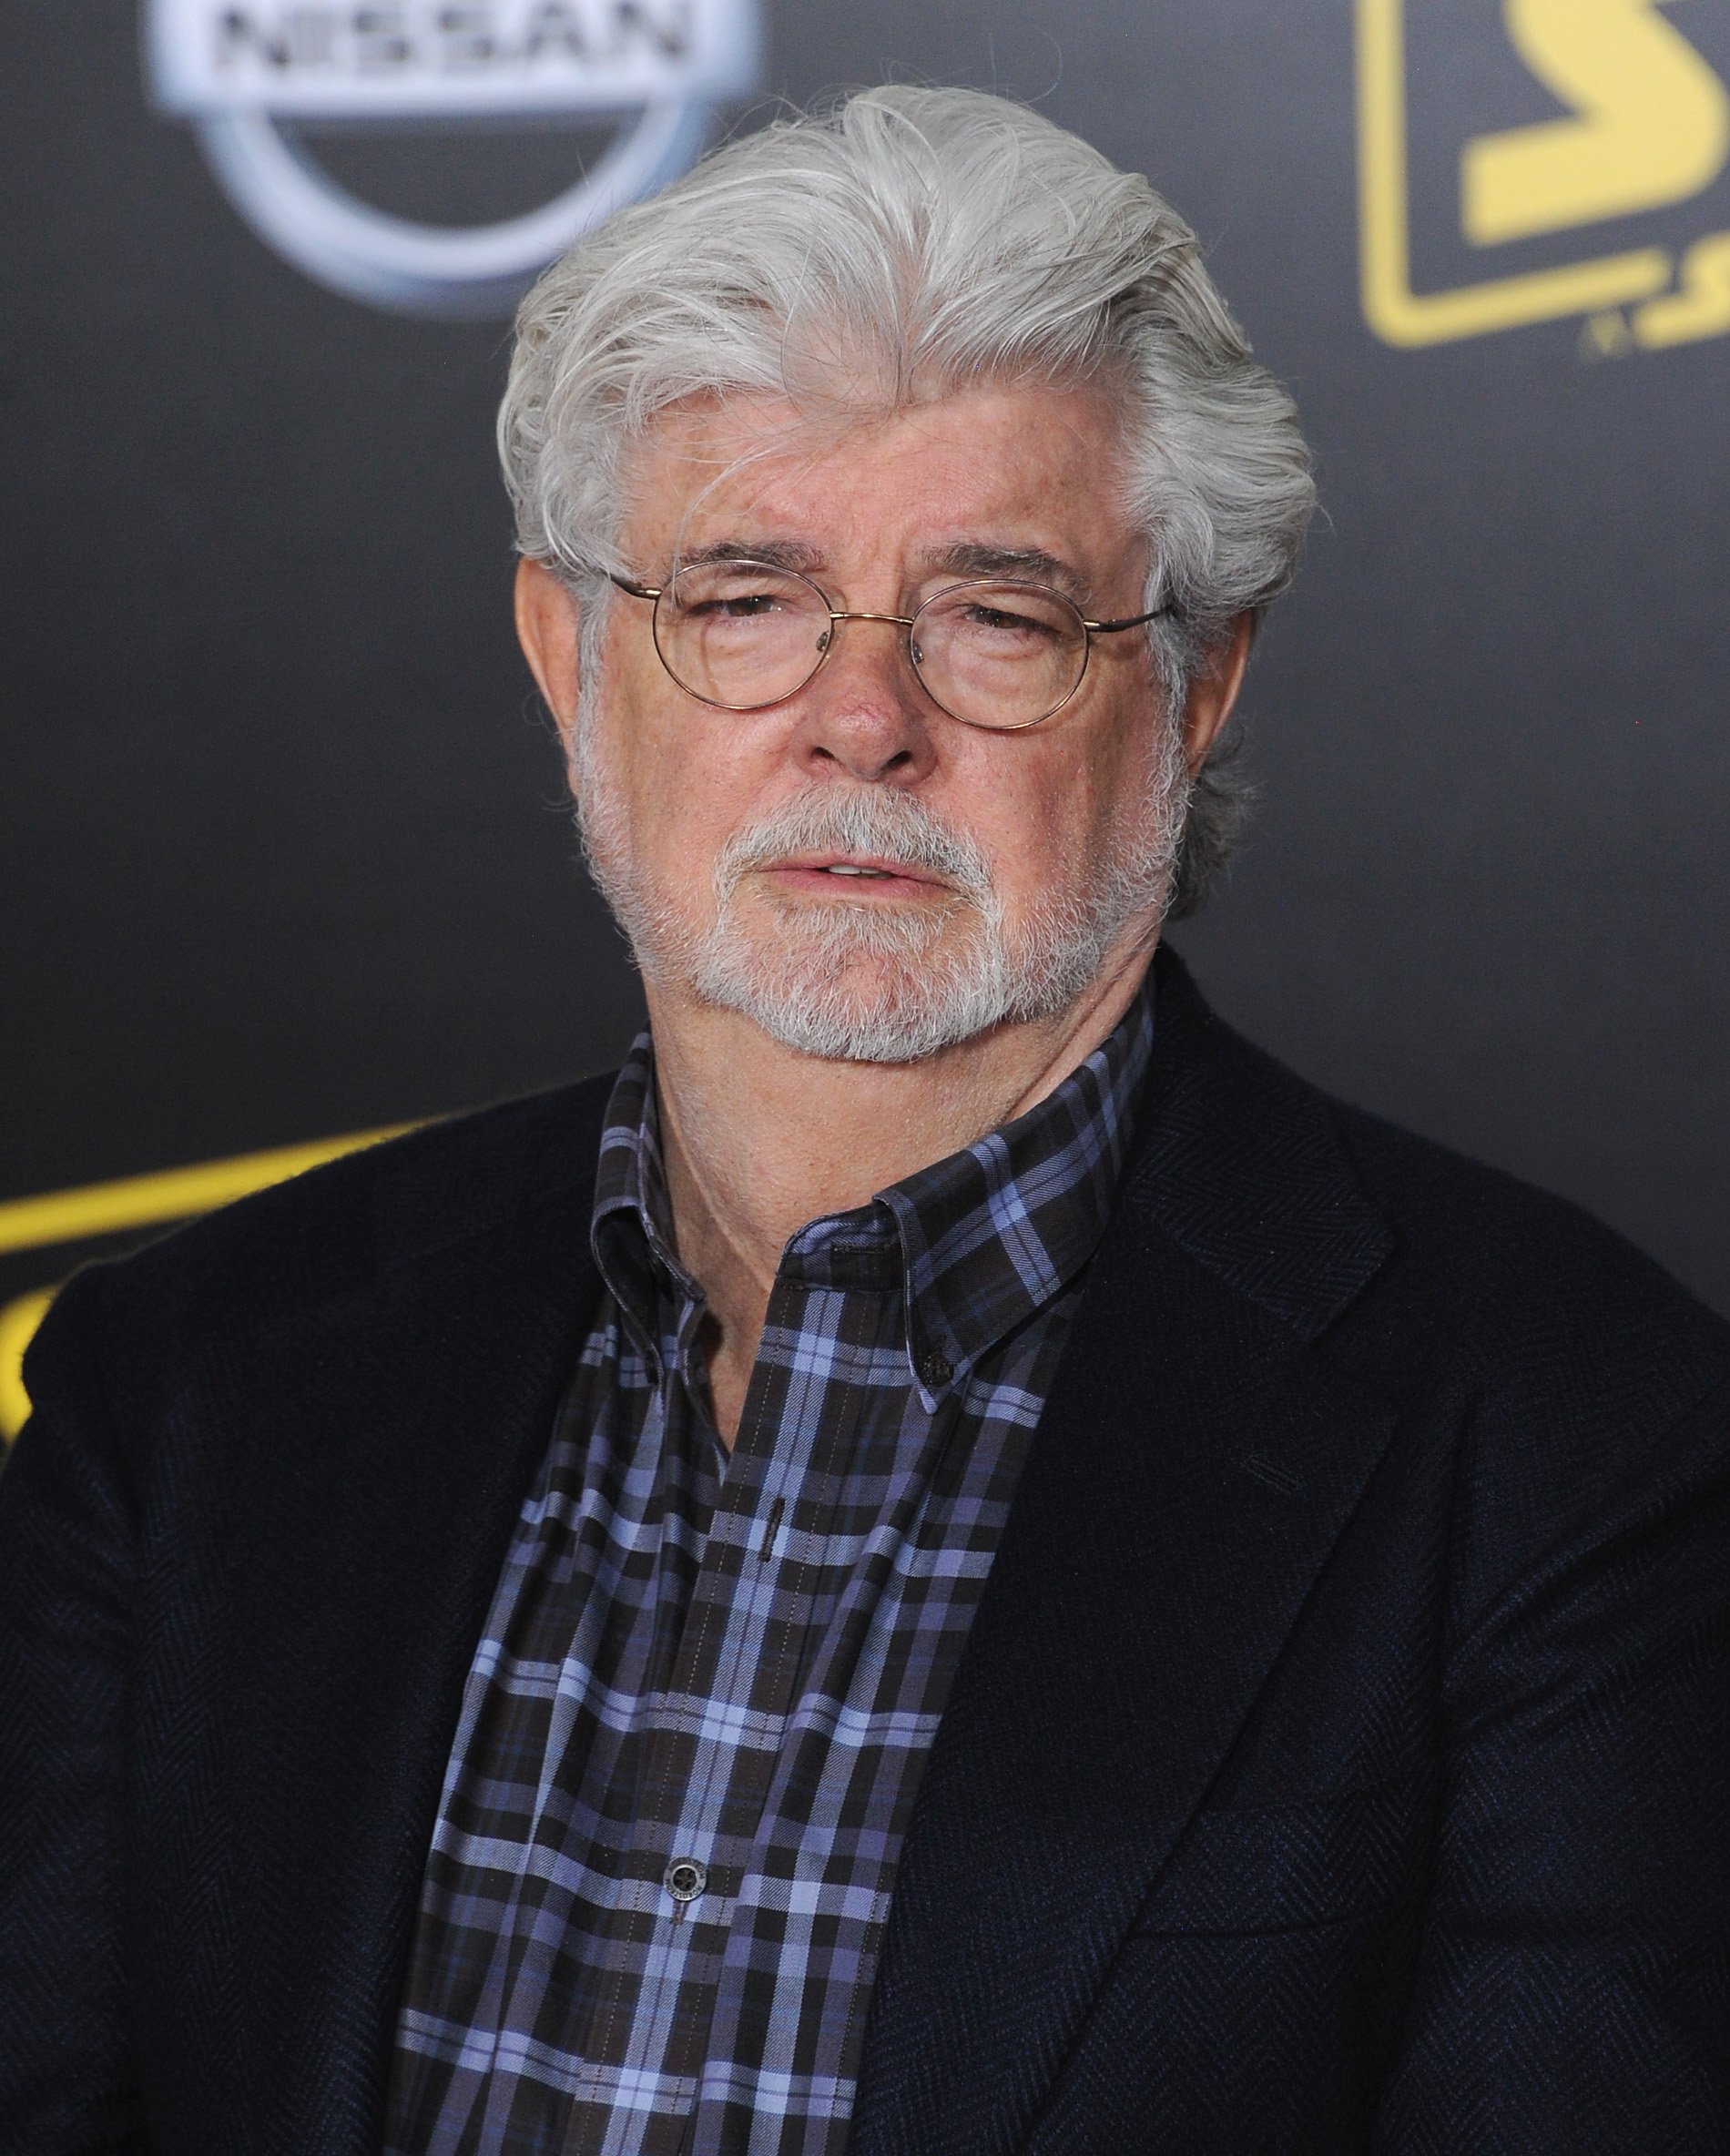 George Lucas attends the premiere of "Solo: A Star Wars Story" in Los Angeles, California on May 10, 2018 | Photo: Getty Images